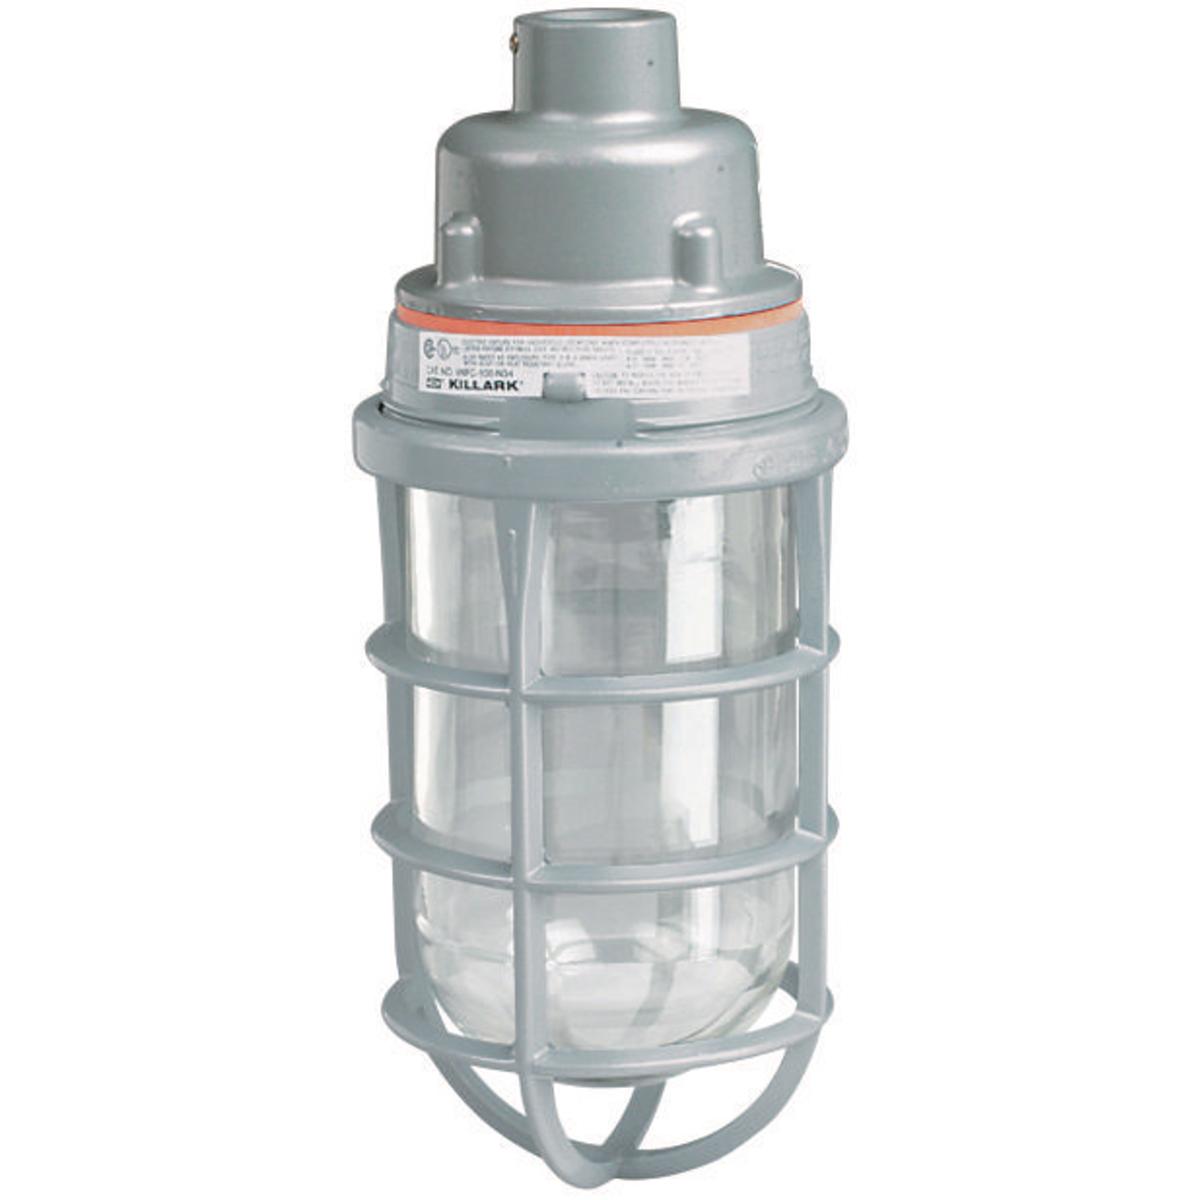 Hubbell VUAGG-2-200PX 200W V Series Incandescent - Pendant - 3/4" Hub With Globe and Guard - Unit Pack  ; Electrostatically applied epoxy/polyester finish ; Modular design ; Hubs are threaded for attachment to conduit ; Set screws in pendant fixture ; Copper-free aluminum (les